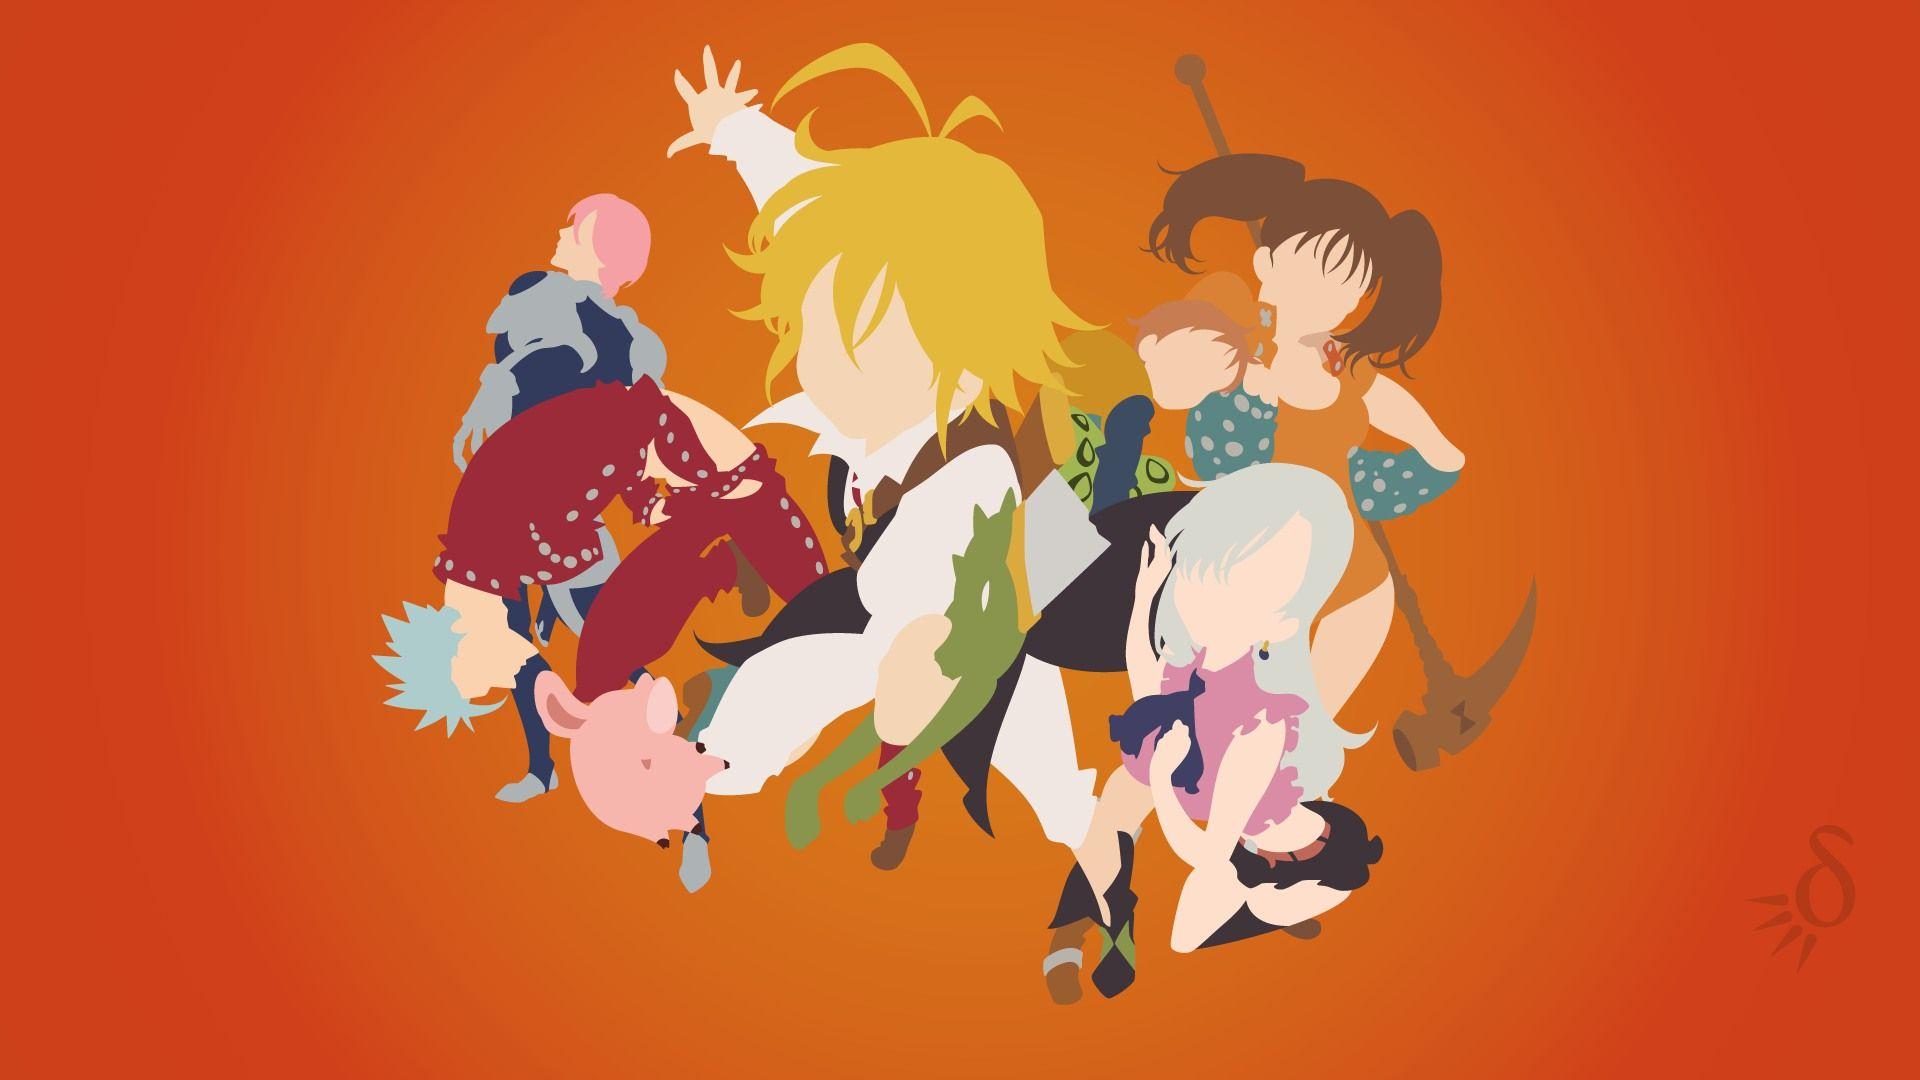 The Seven Deadly Sins Wallpaper Free The Seven Deadly Sins